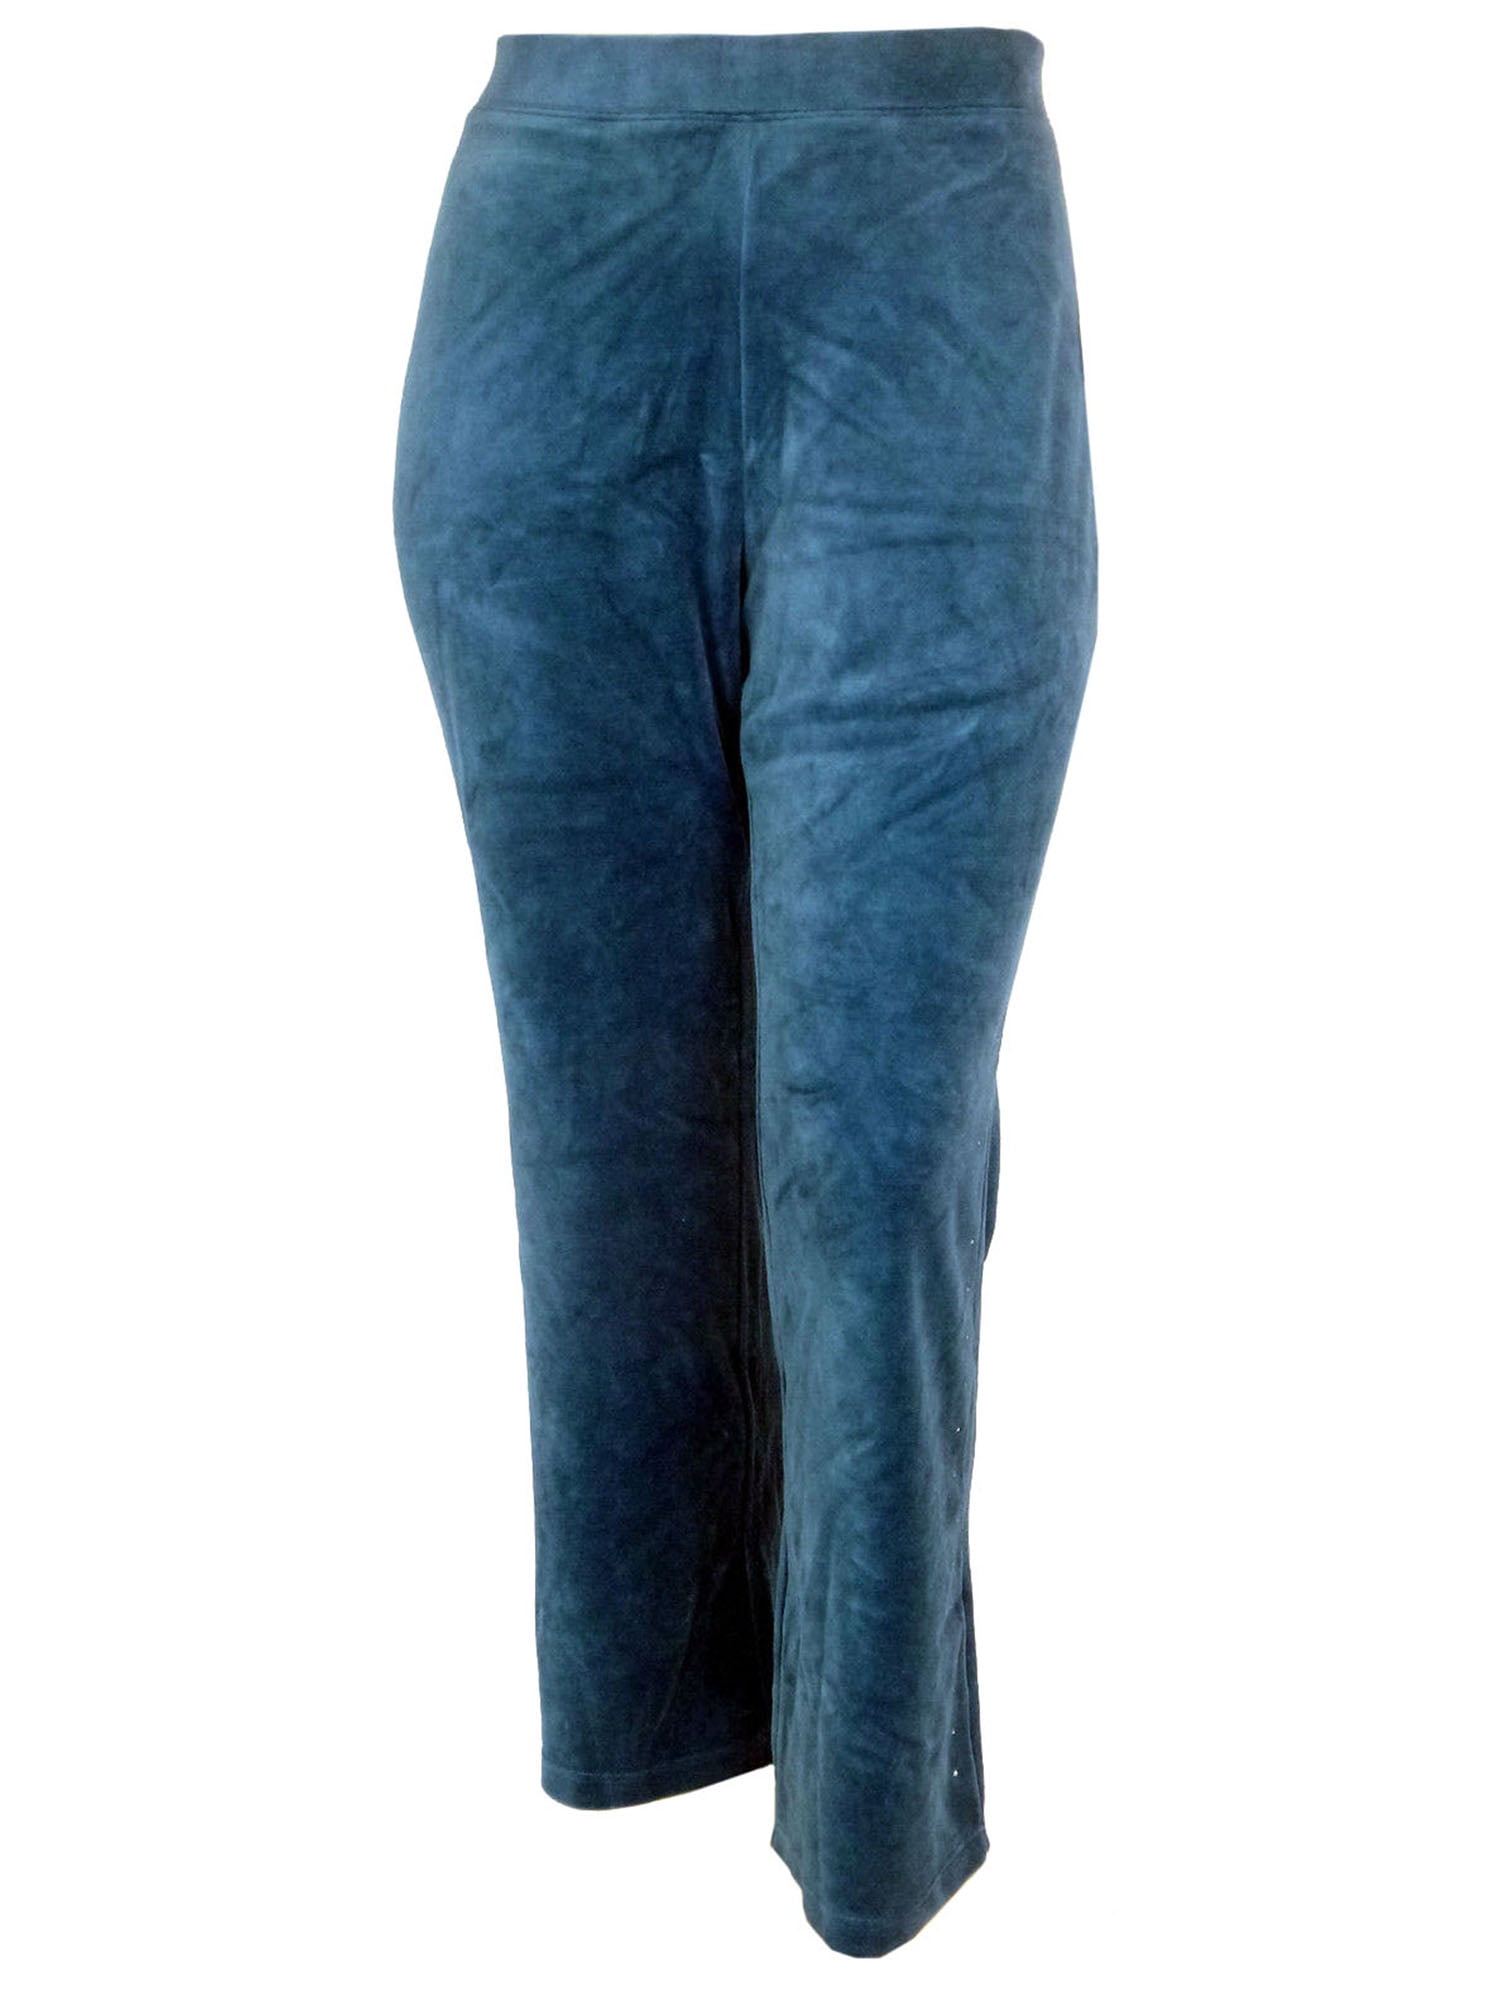 Style & Co Women's Plus Size Pull On Velour Athletic Pants 0x Rustic ...